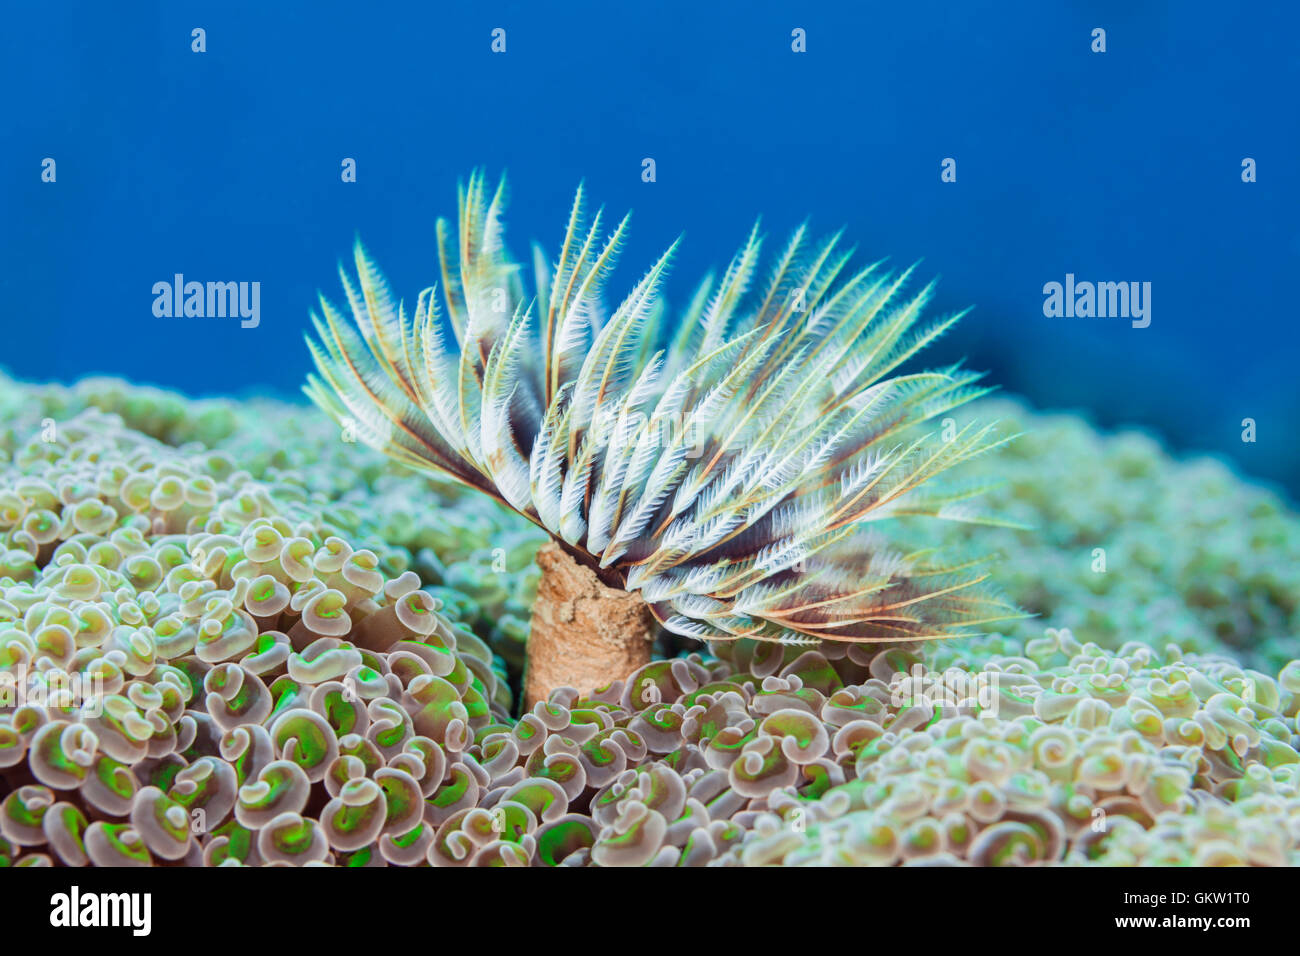 Feather Duster Worm, Sabellastarte sp., Ambon, Moluccas, Indonesia Stock Photo